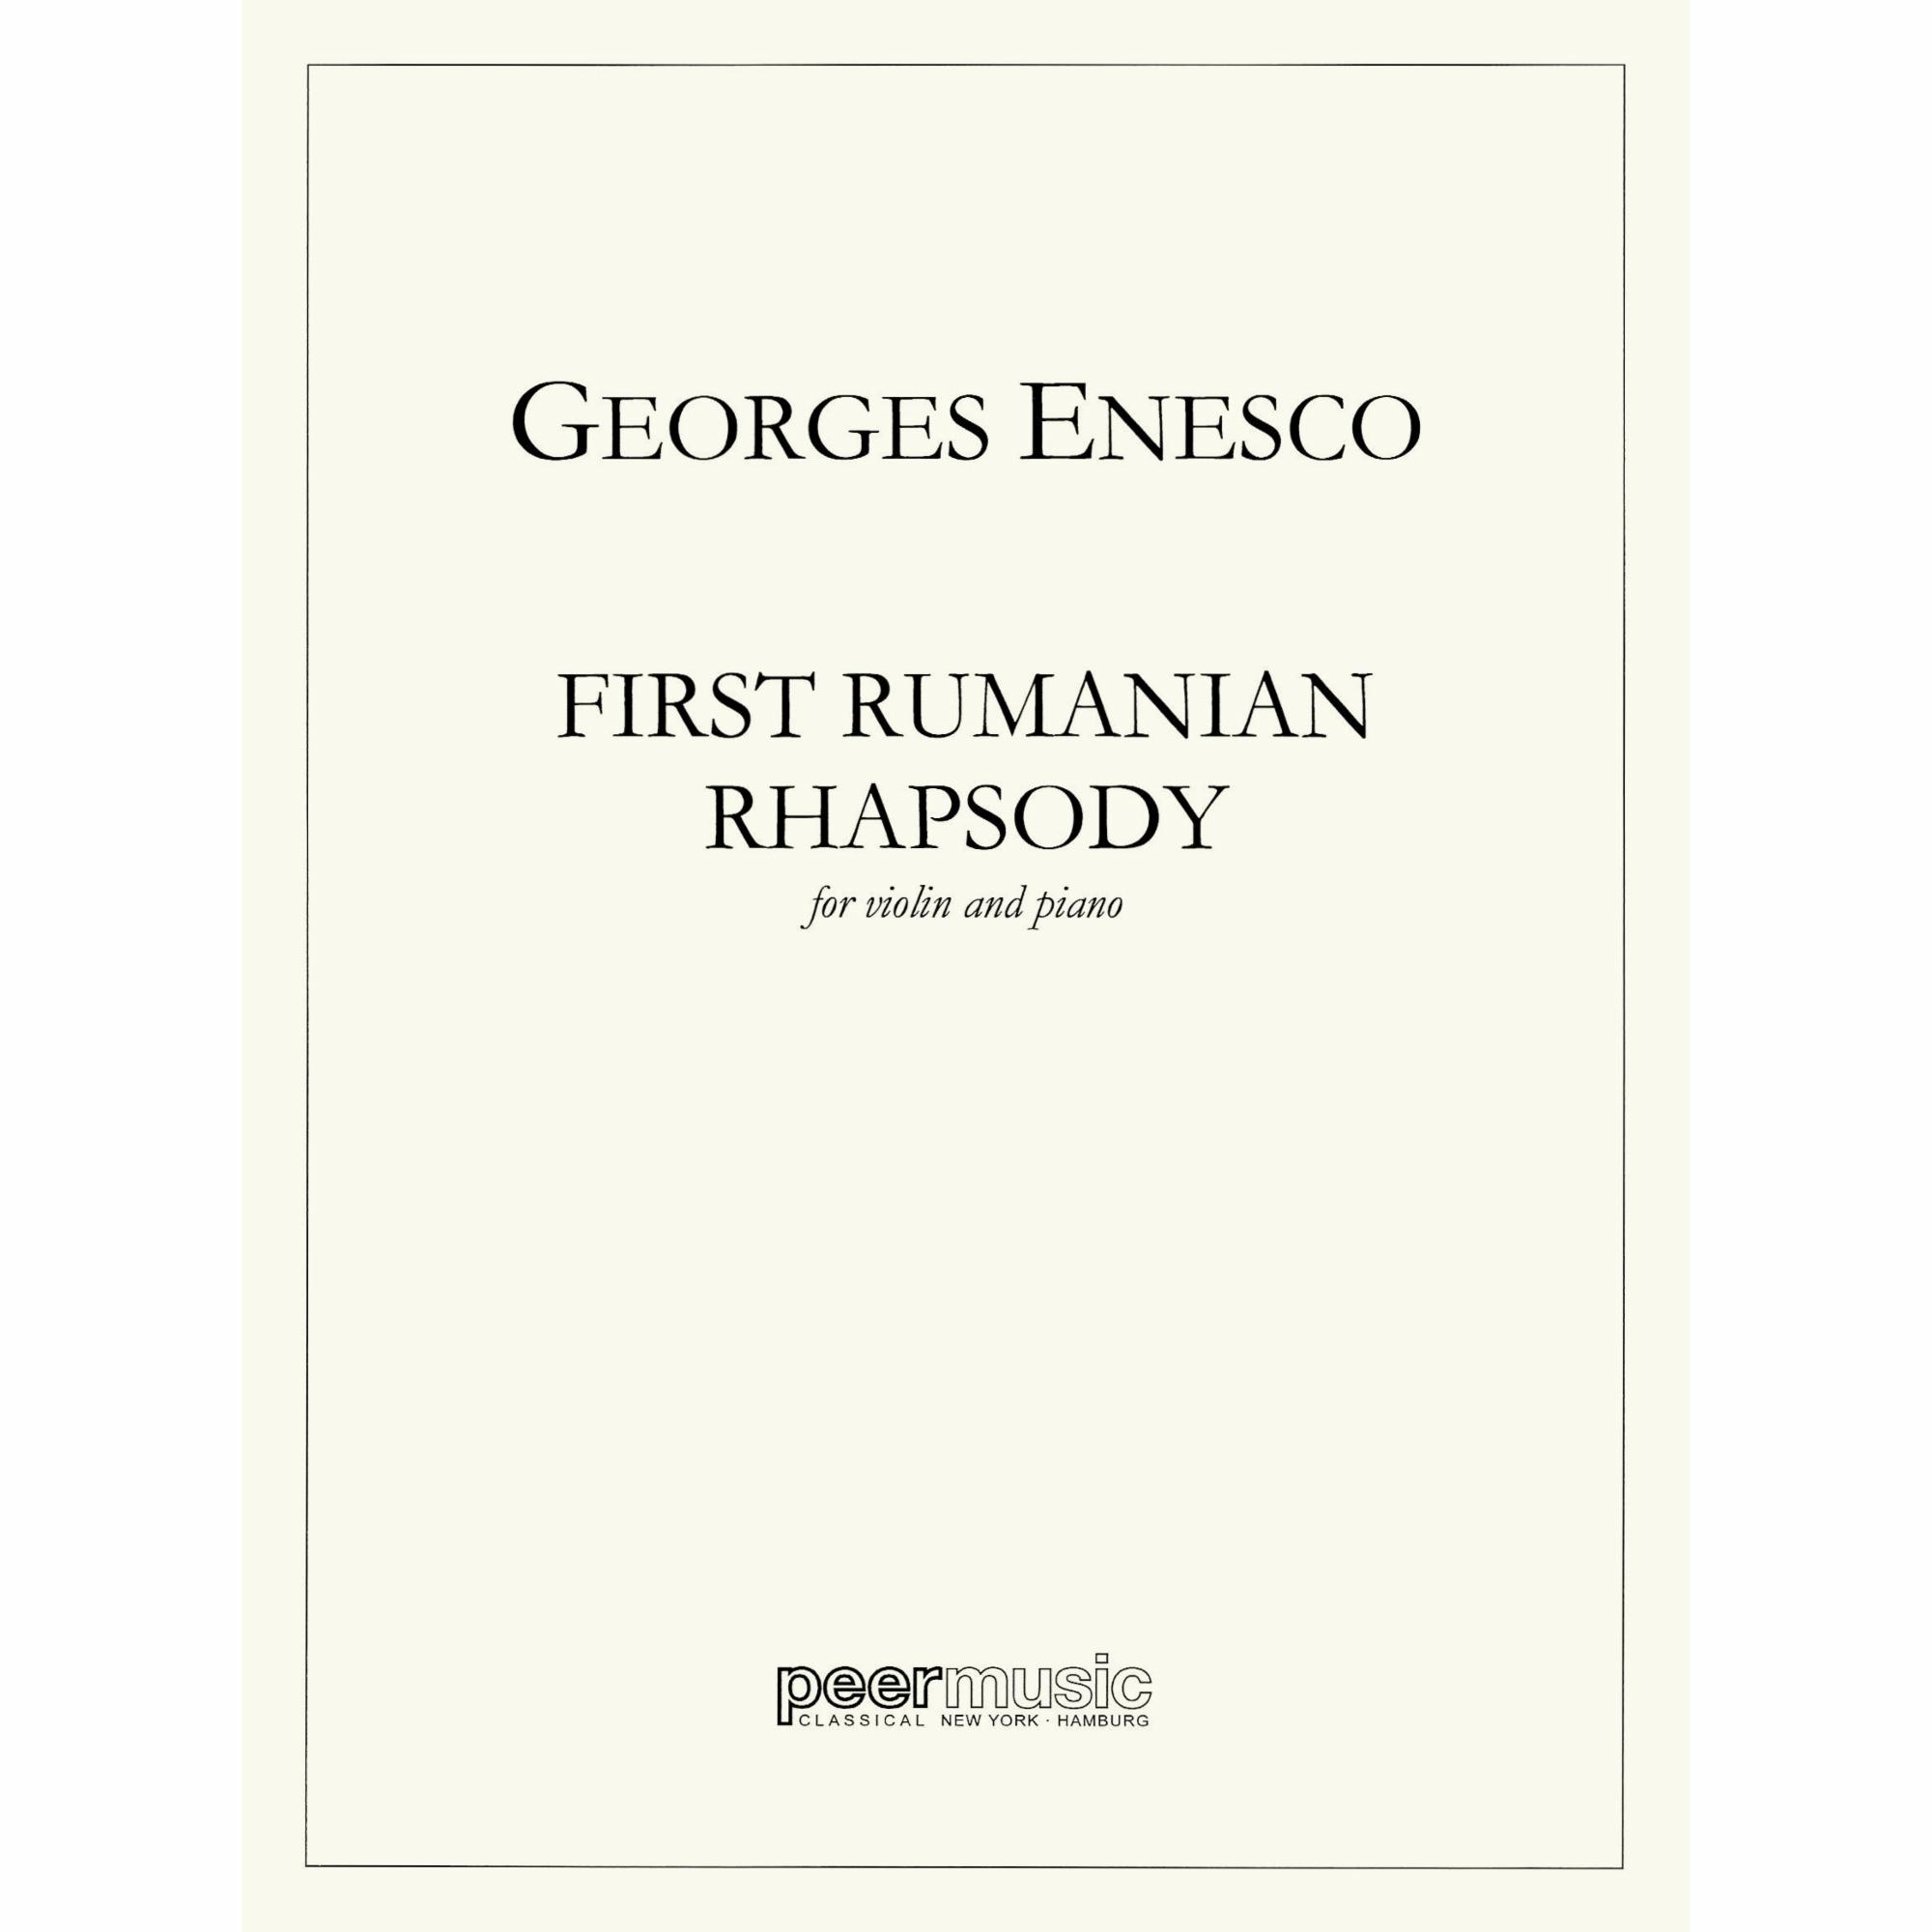 Enescu -- First Rumanian Rhapsody for Violin and Piano